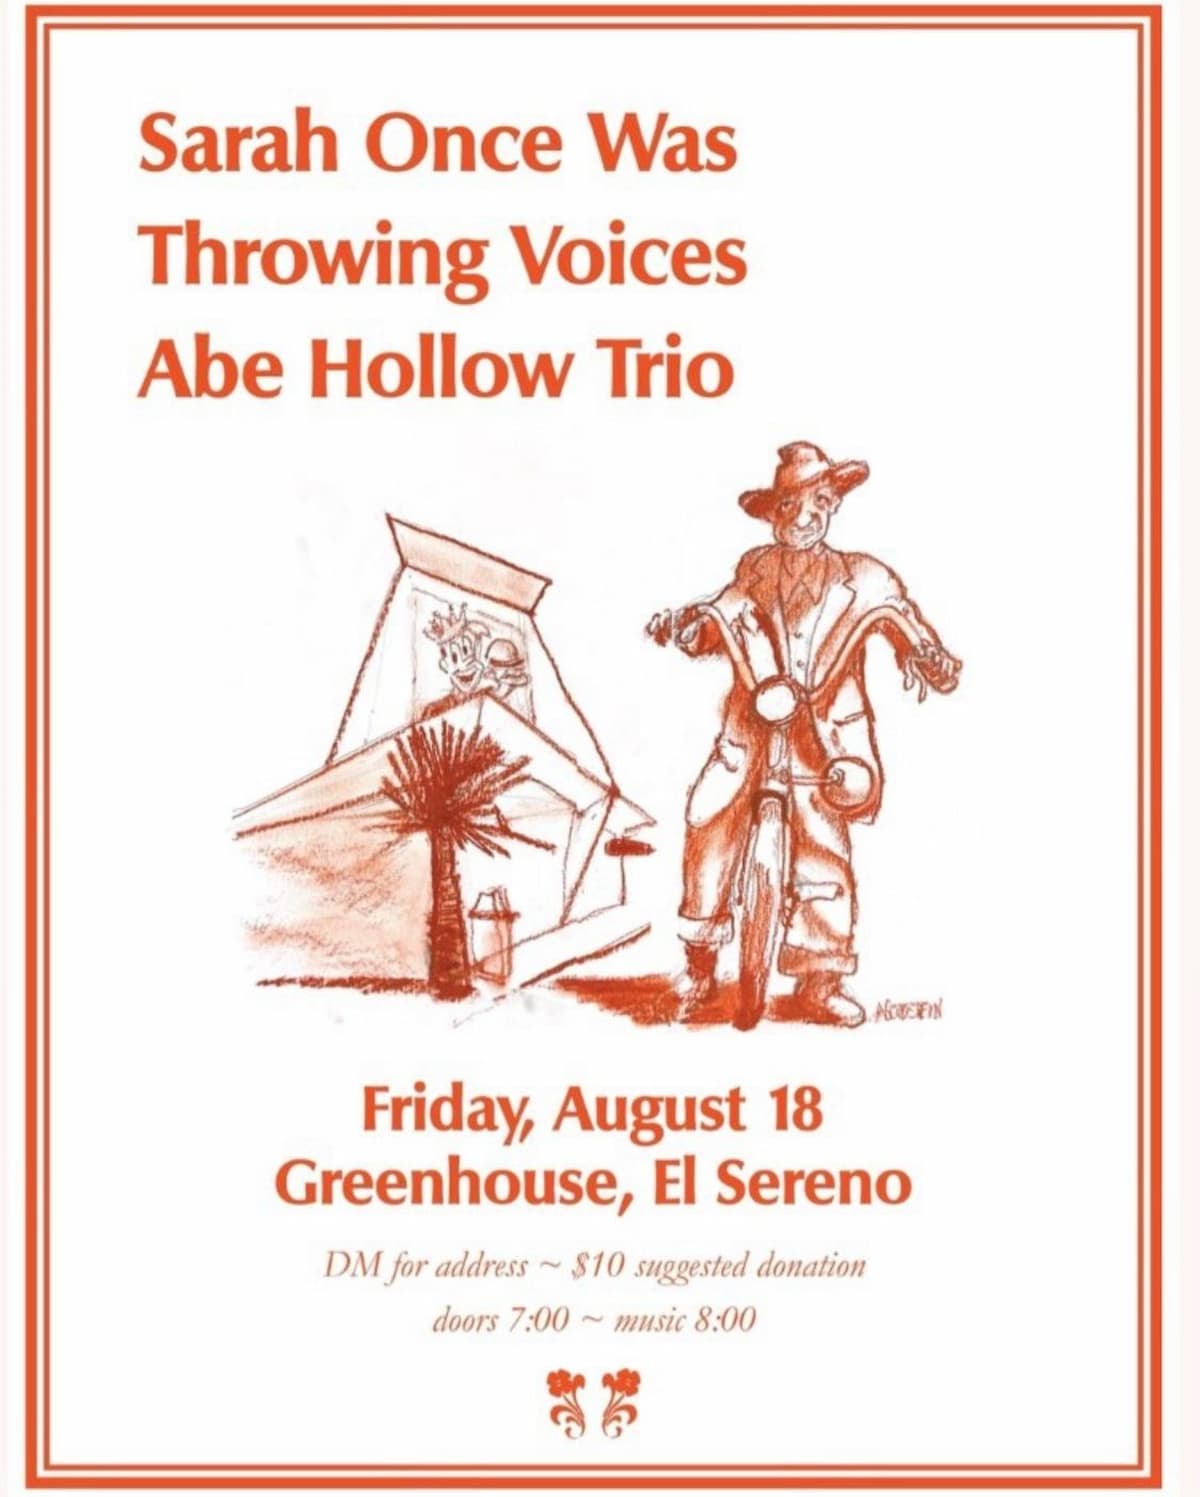 Sarah Once Was / Throwing Voices / Abe Hollow Trio